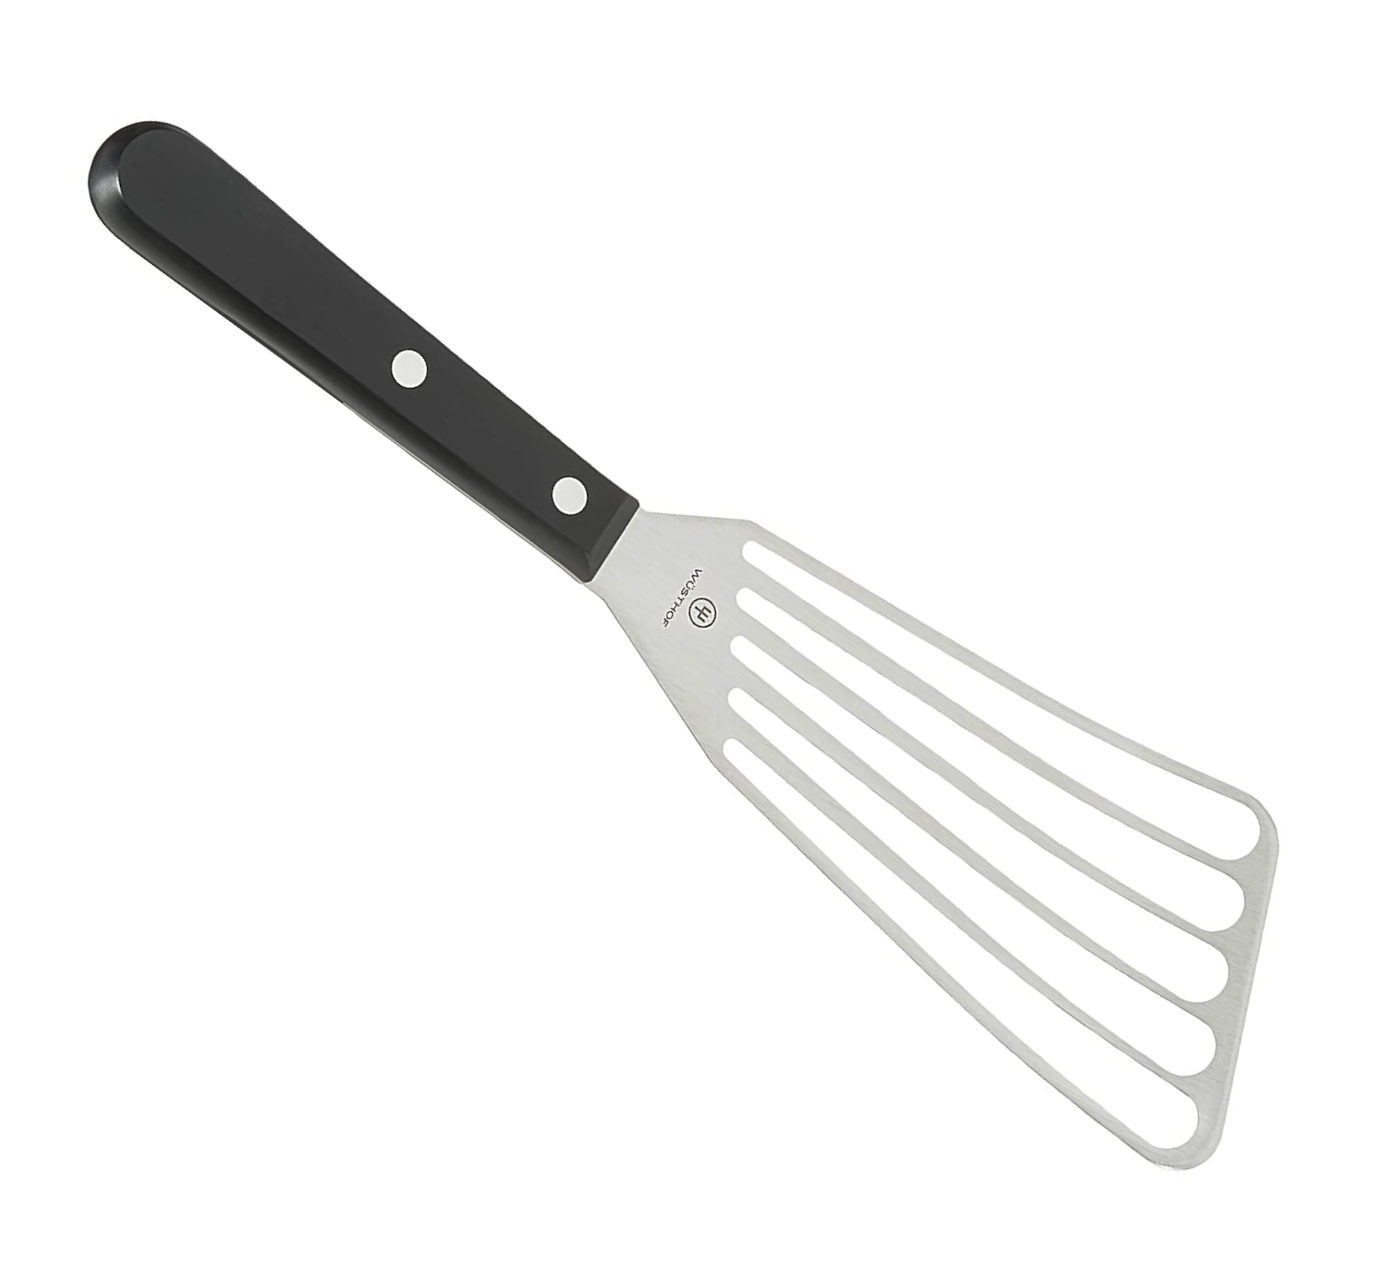 Best offset slotted spatula for pancakes- WÜSTHOF Gourmet 6.5